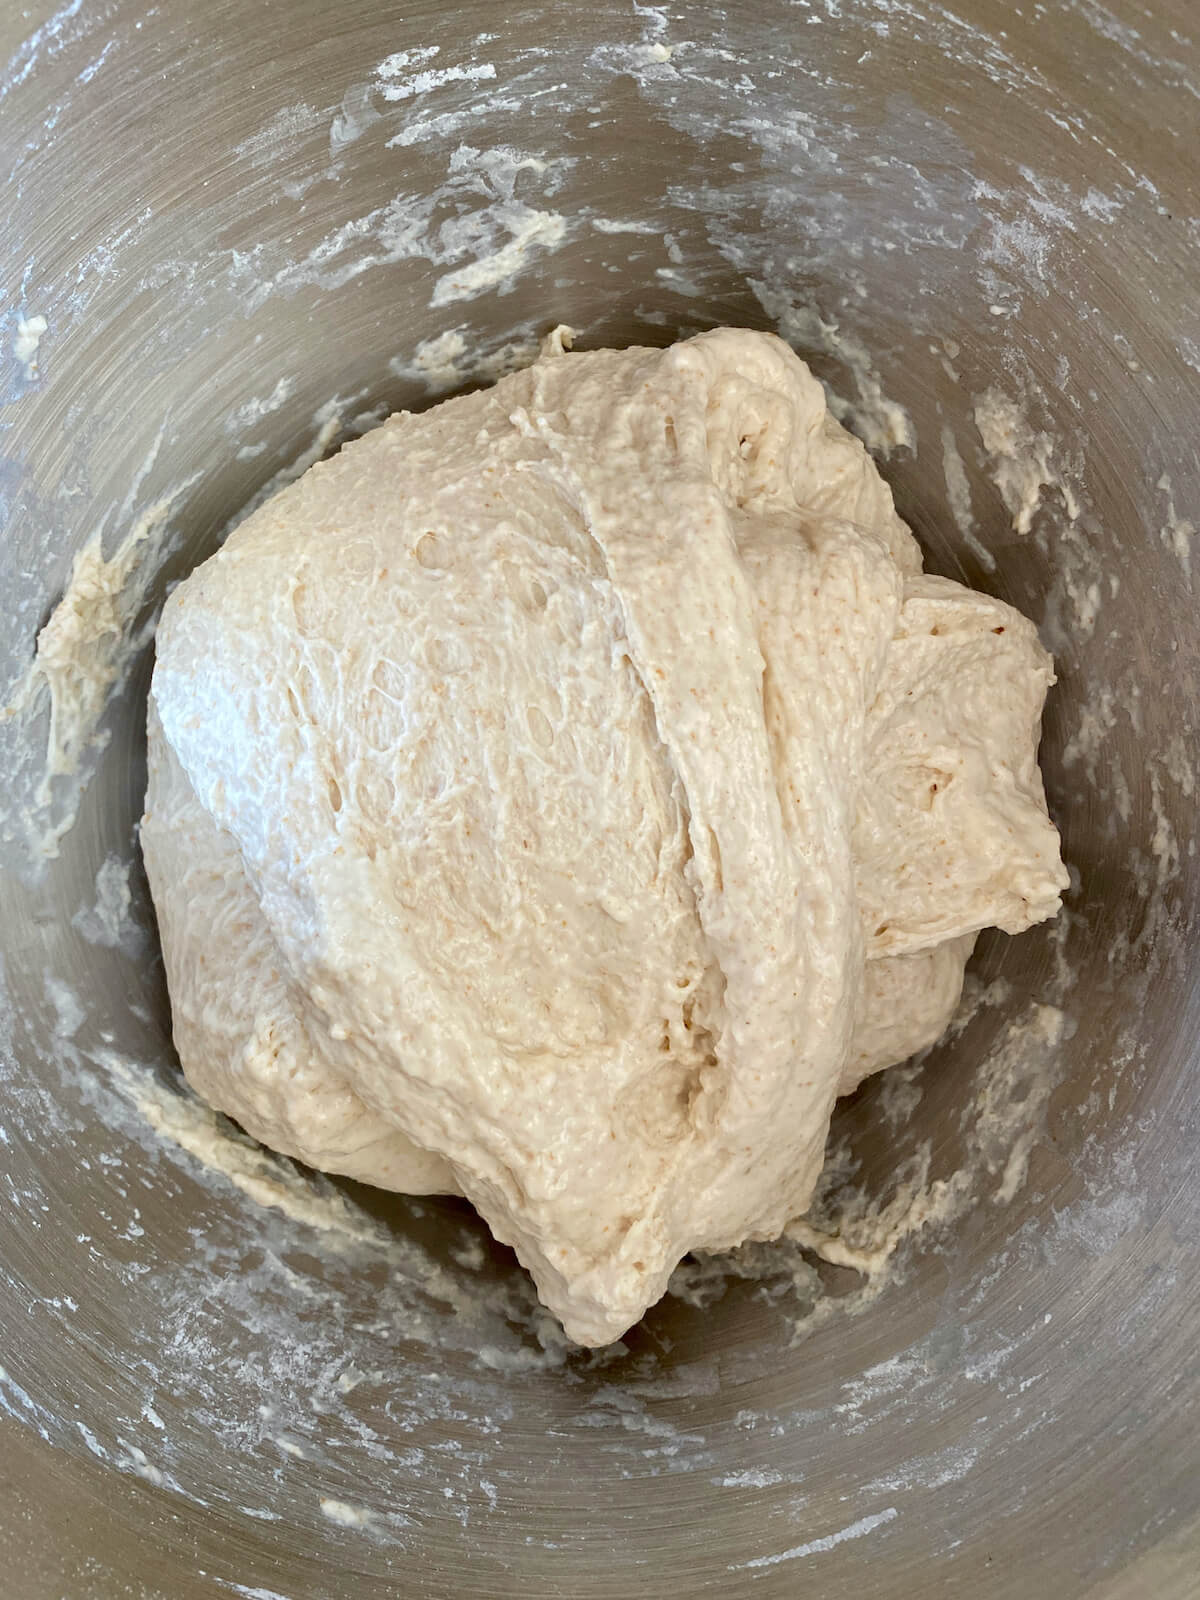 Pizza dough after a series of stretch and folds.